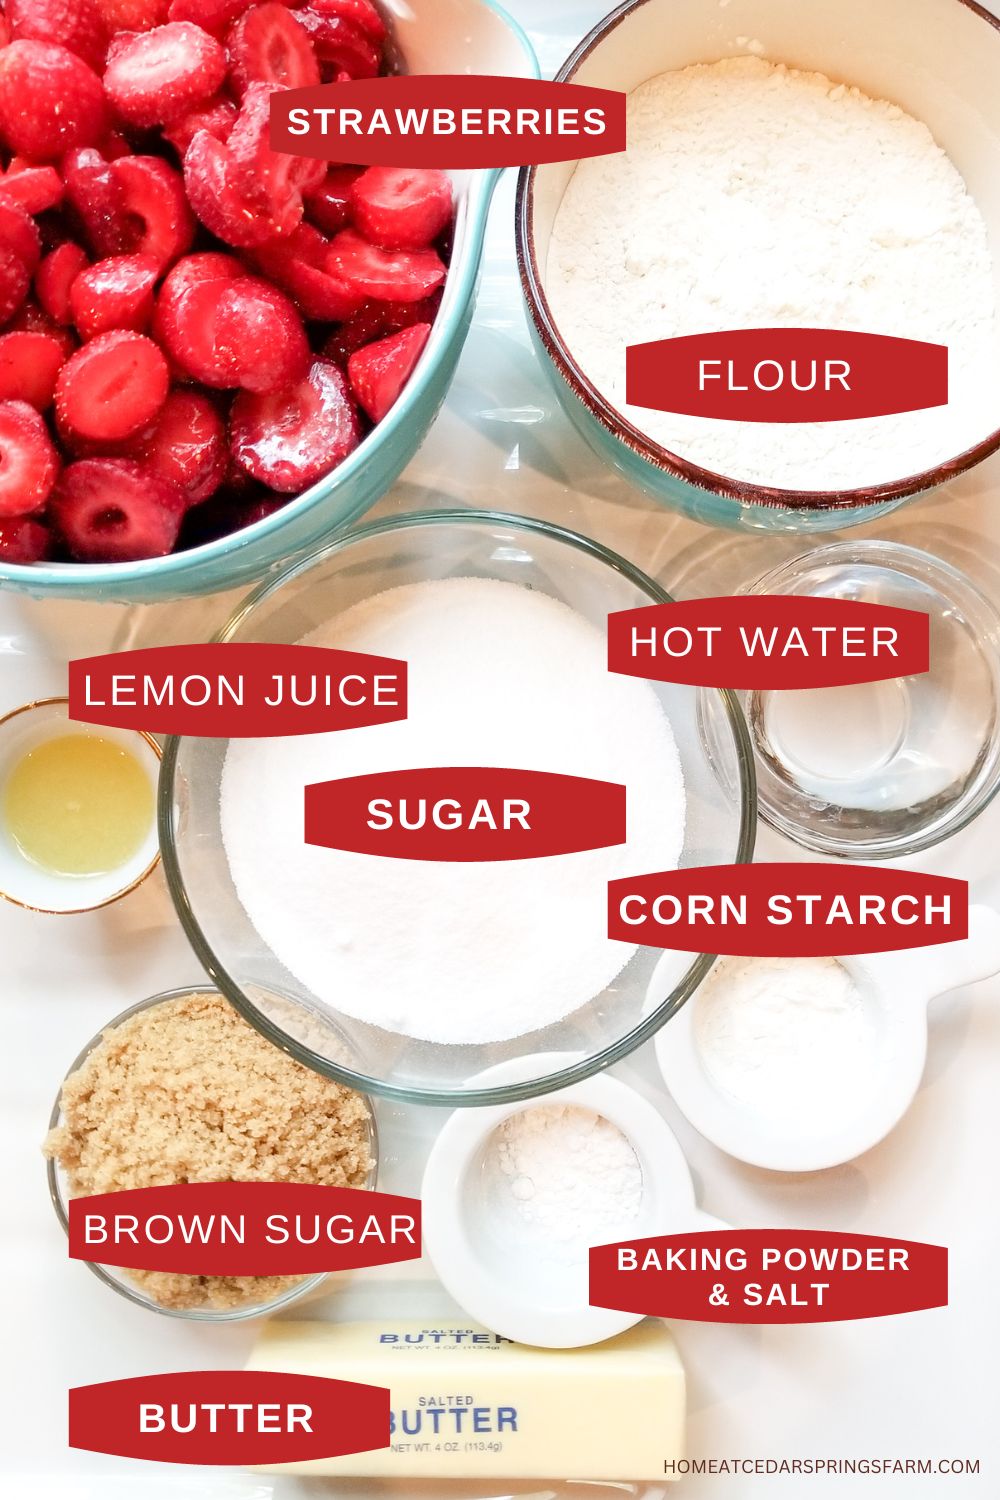 Ingredients for Strawberry Cobbler with text overlay.